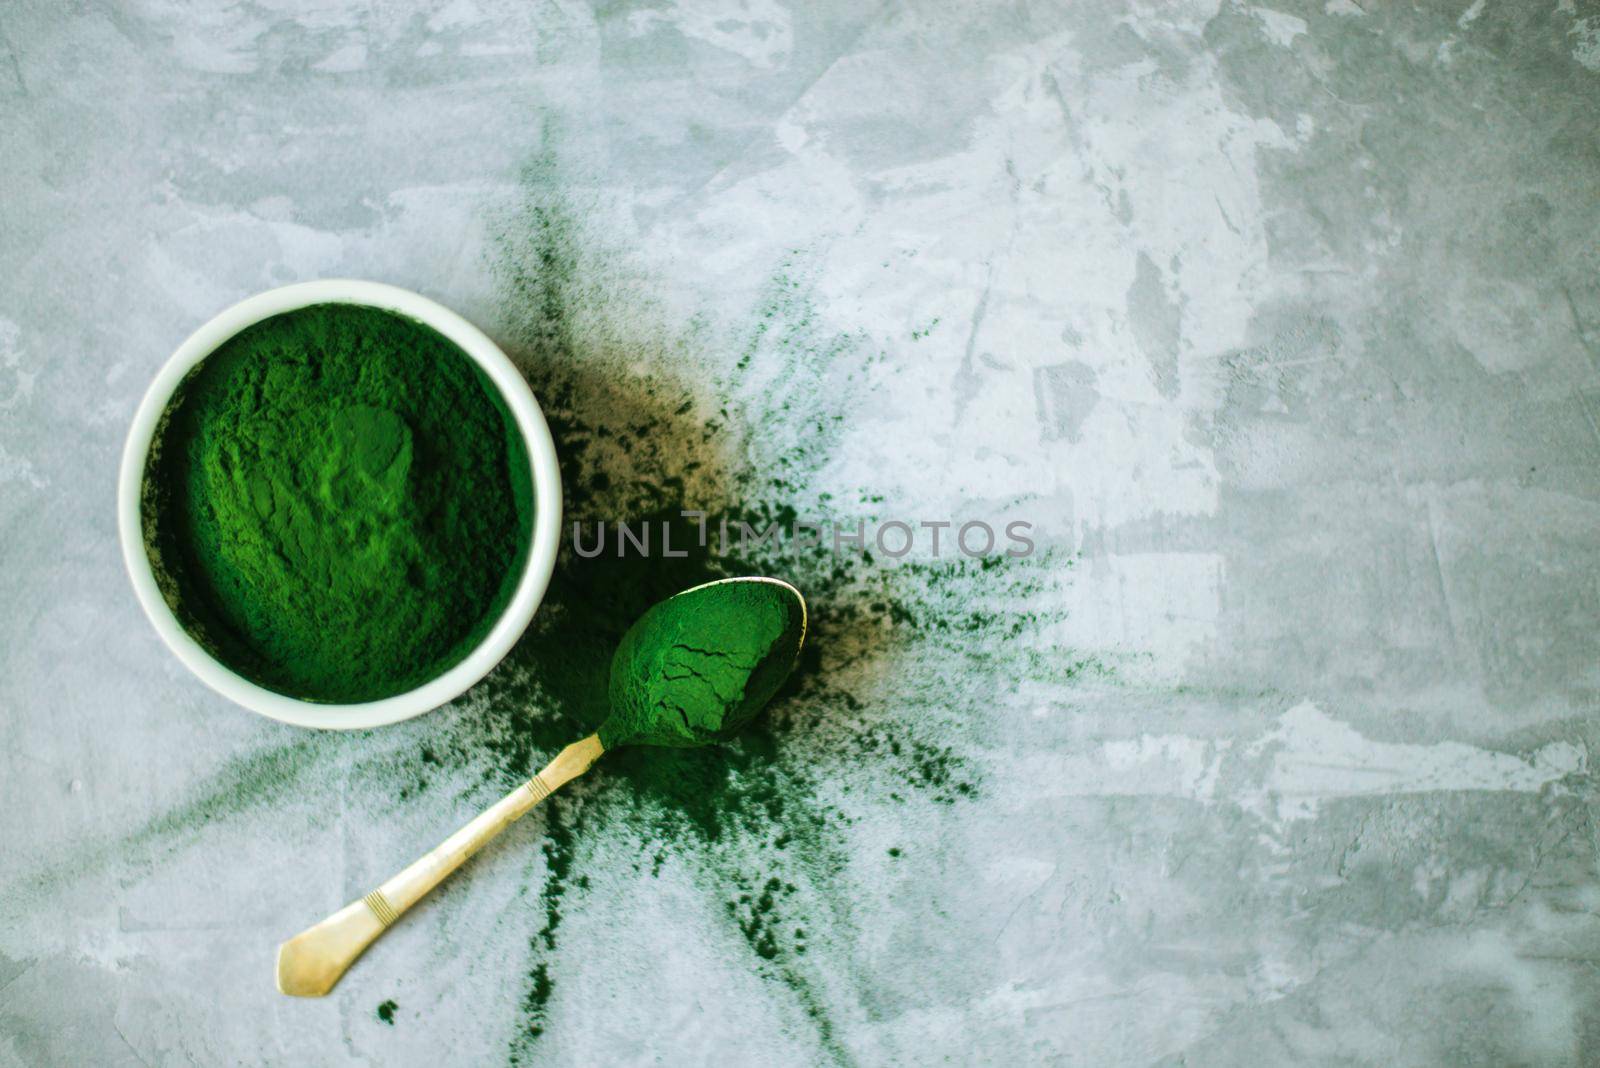 spirulina powder in white plate on concrete background. High quality photo